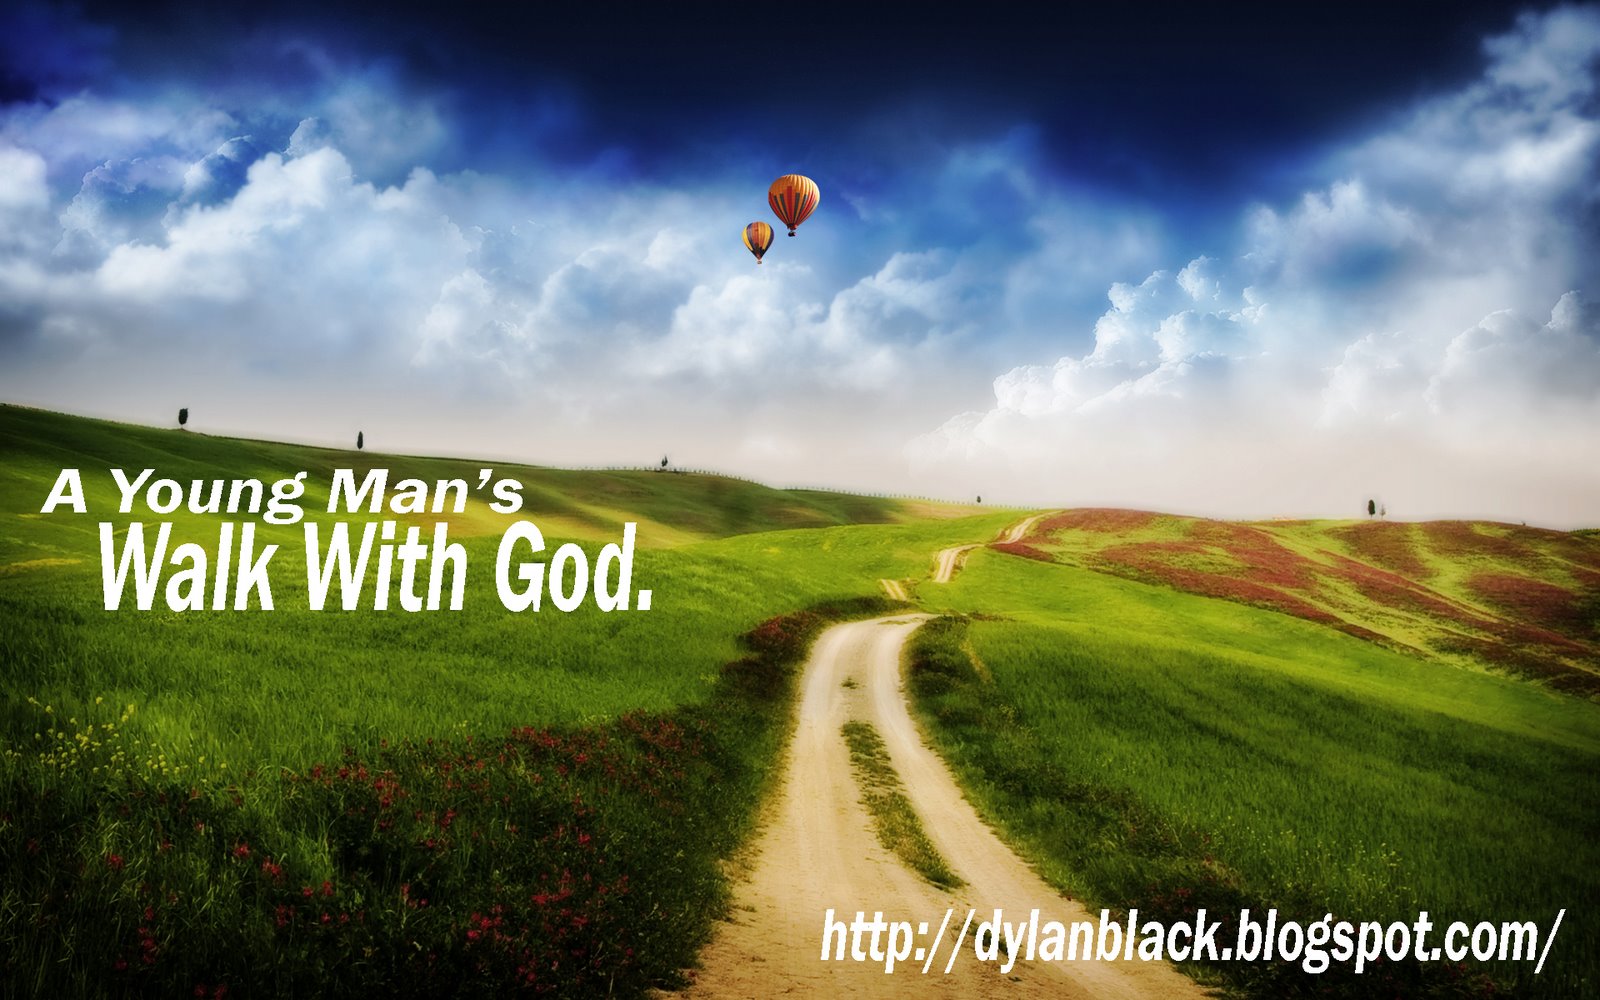 A Young Man's Walk With God